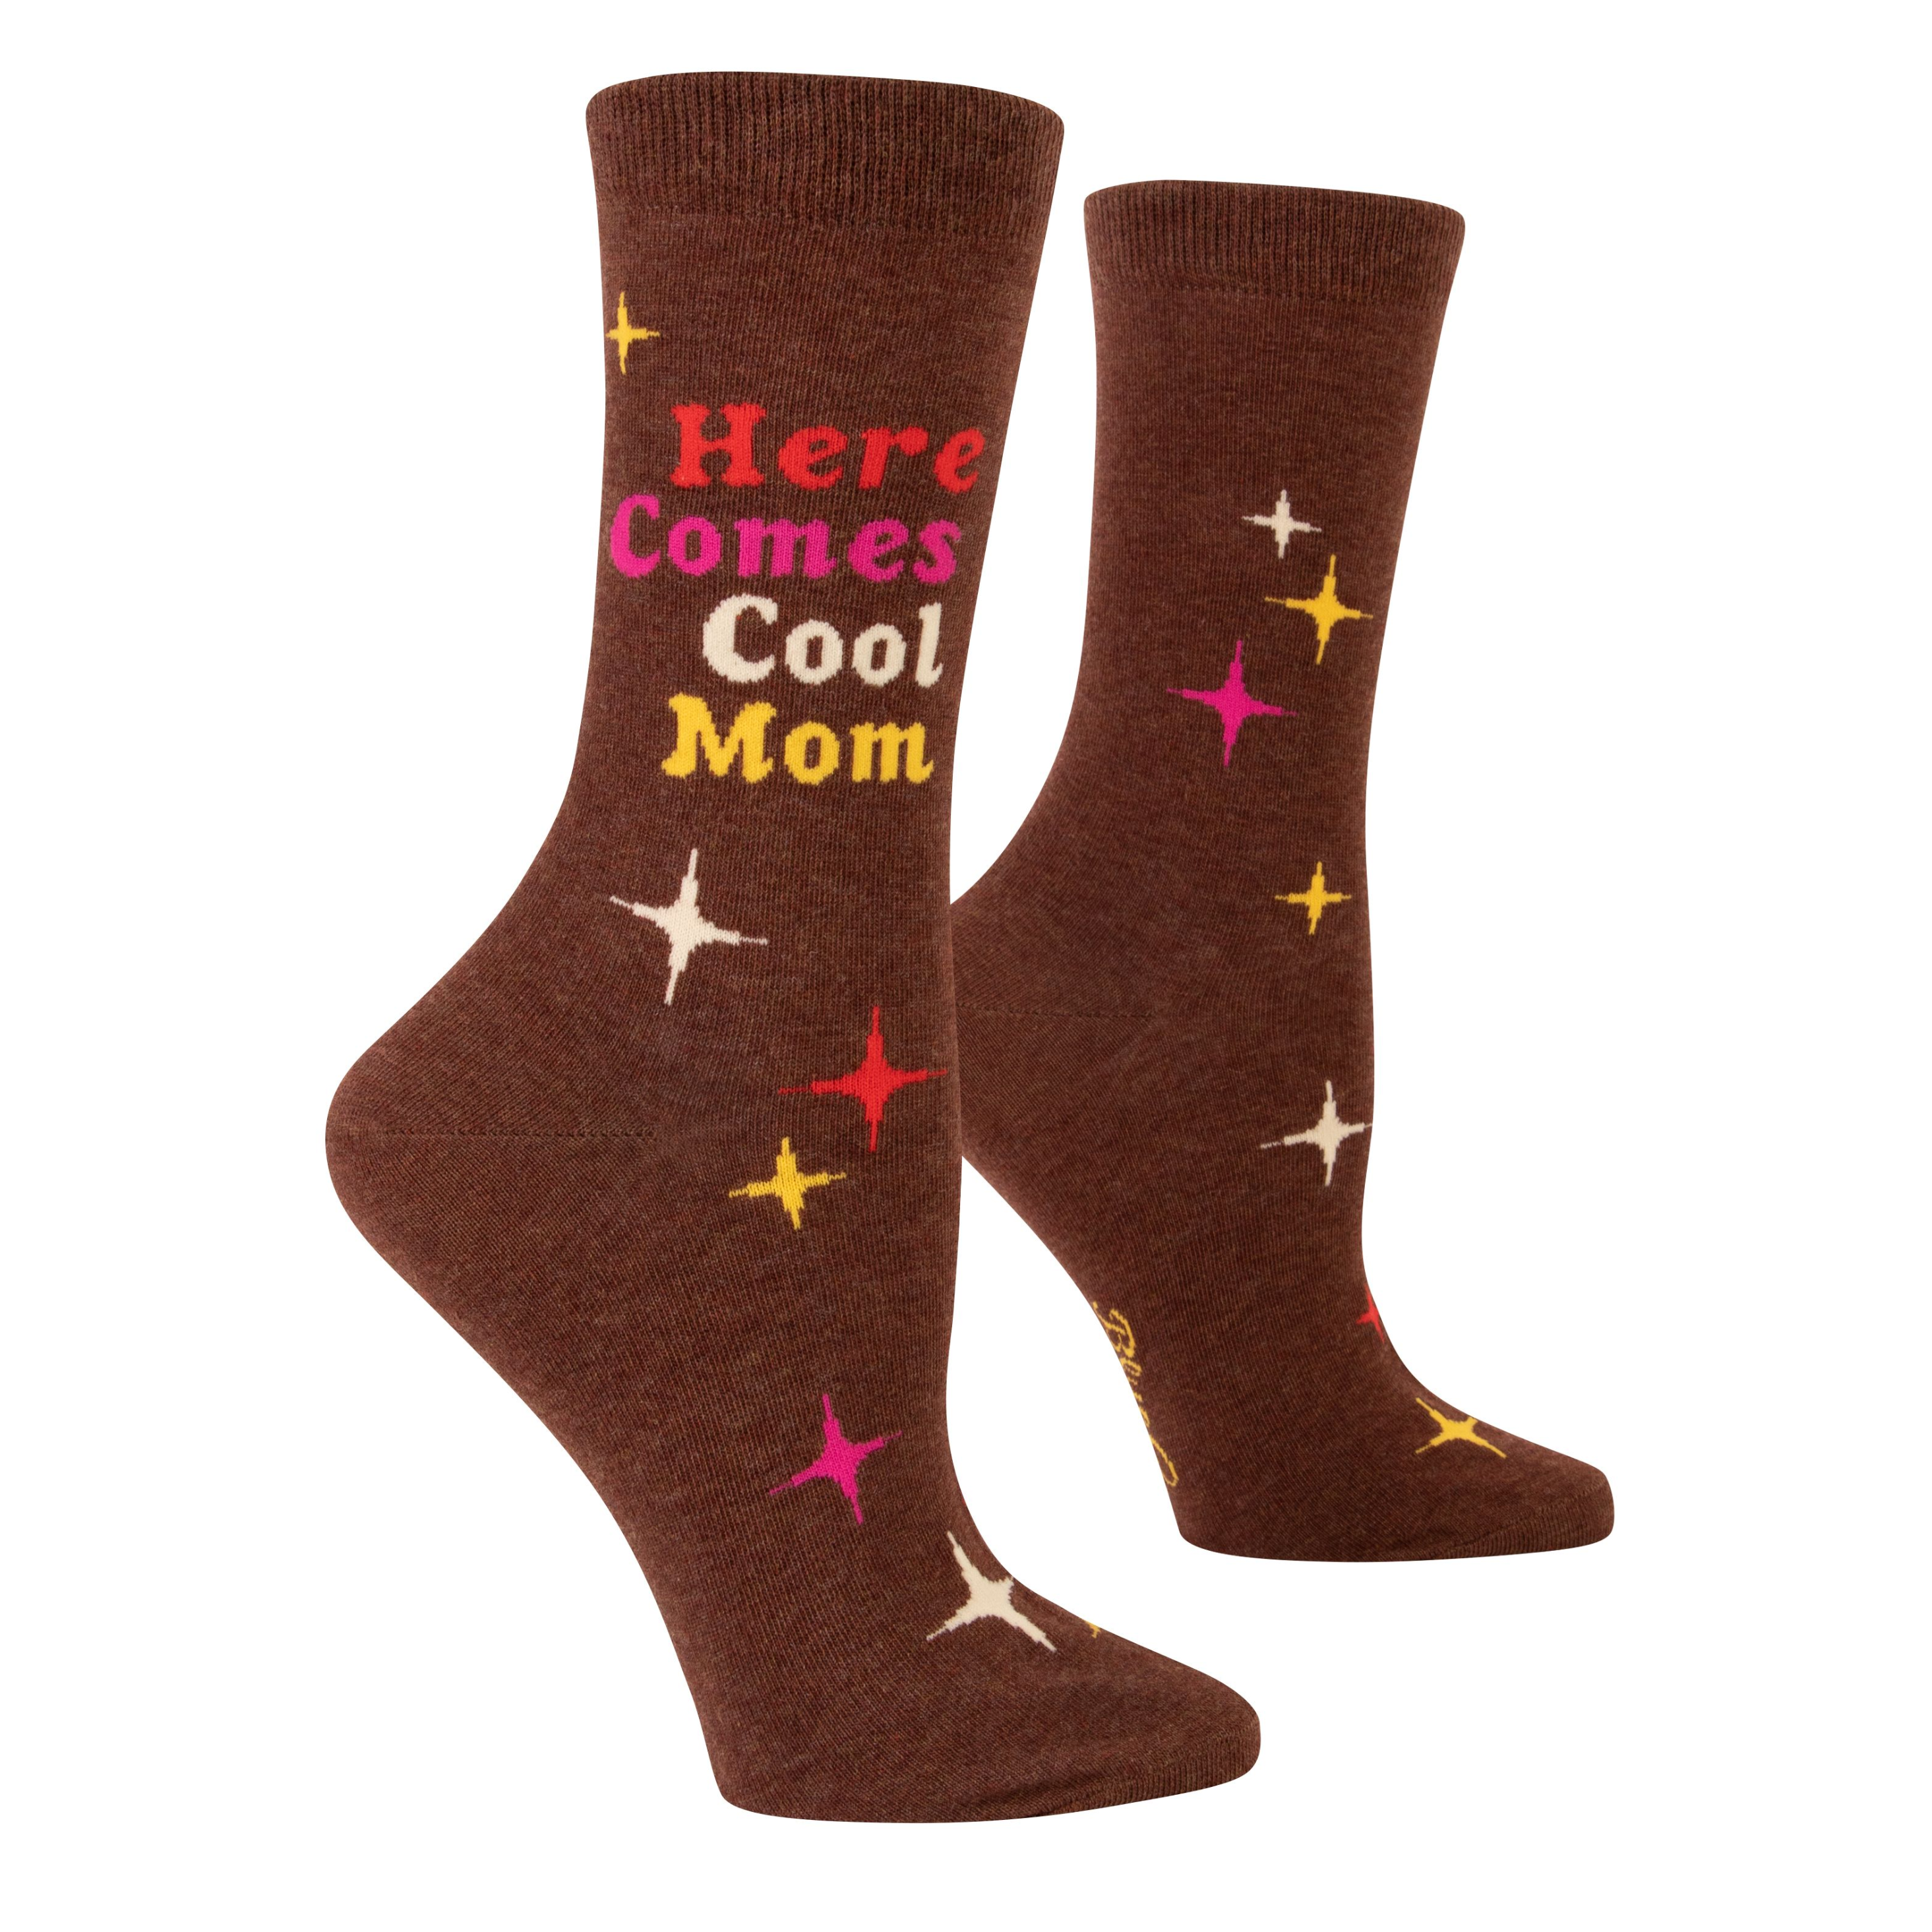 brown socks with white pink yellow and red stars and on ankle it says here comes cool mom